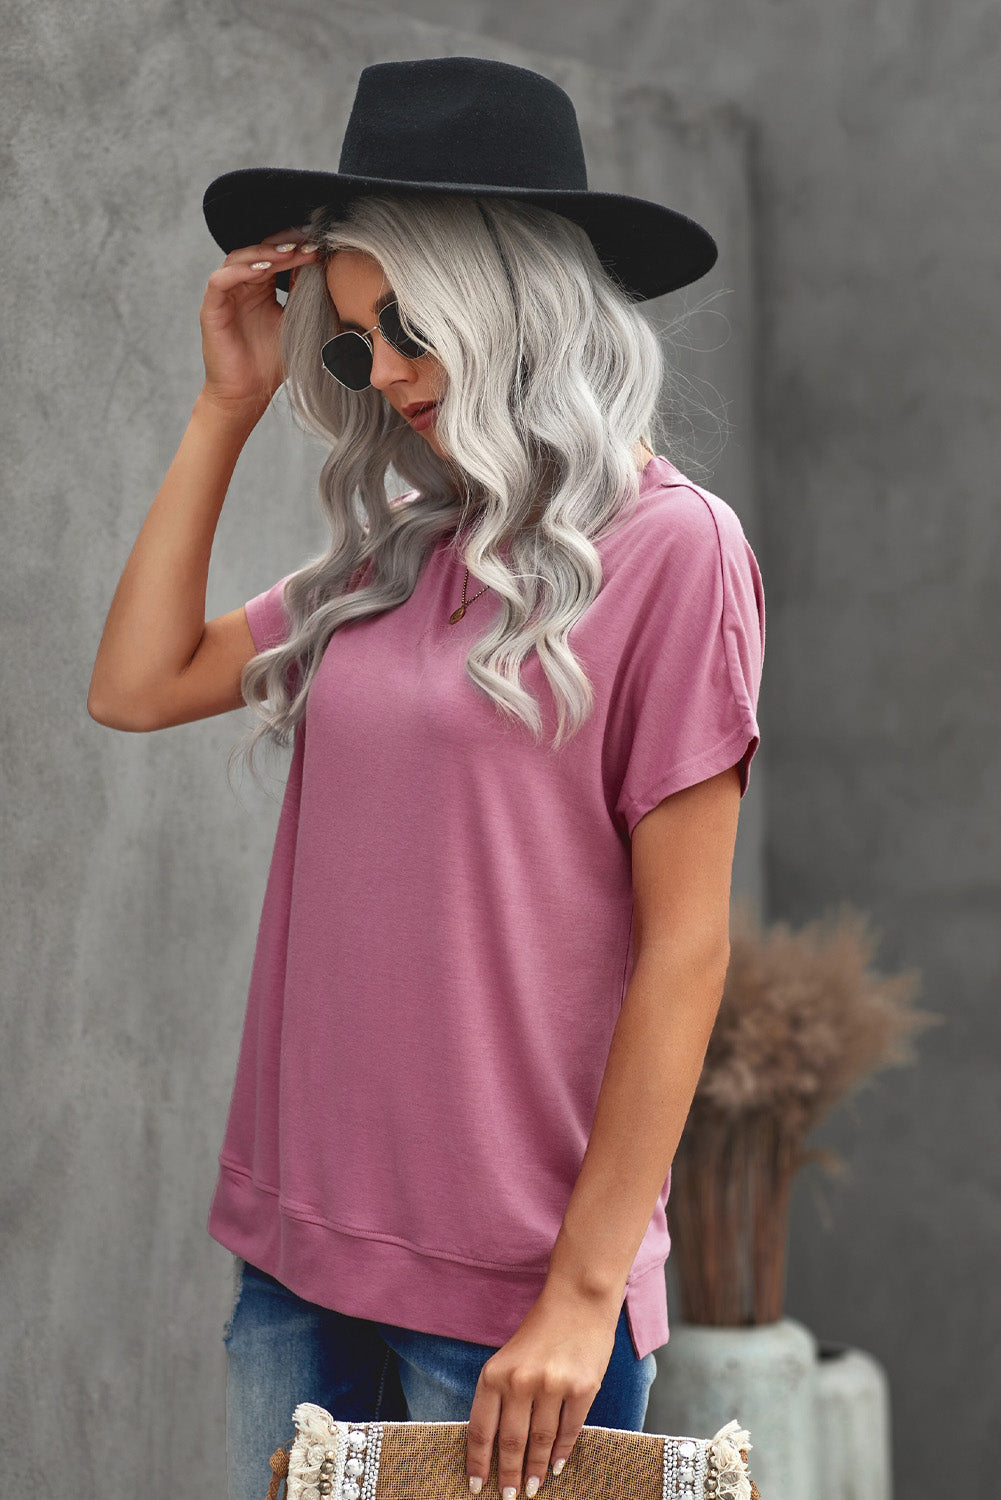 Trendsi Cupid Beauty Supplies Woman's T-Shirts Round Neck Short Sleeve Solid Color Tee